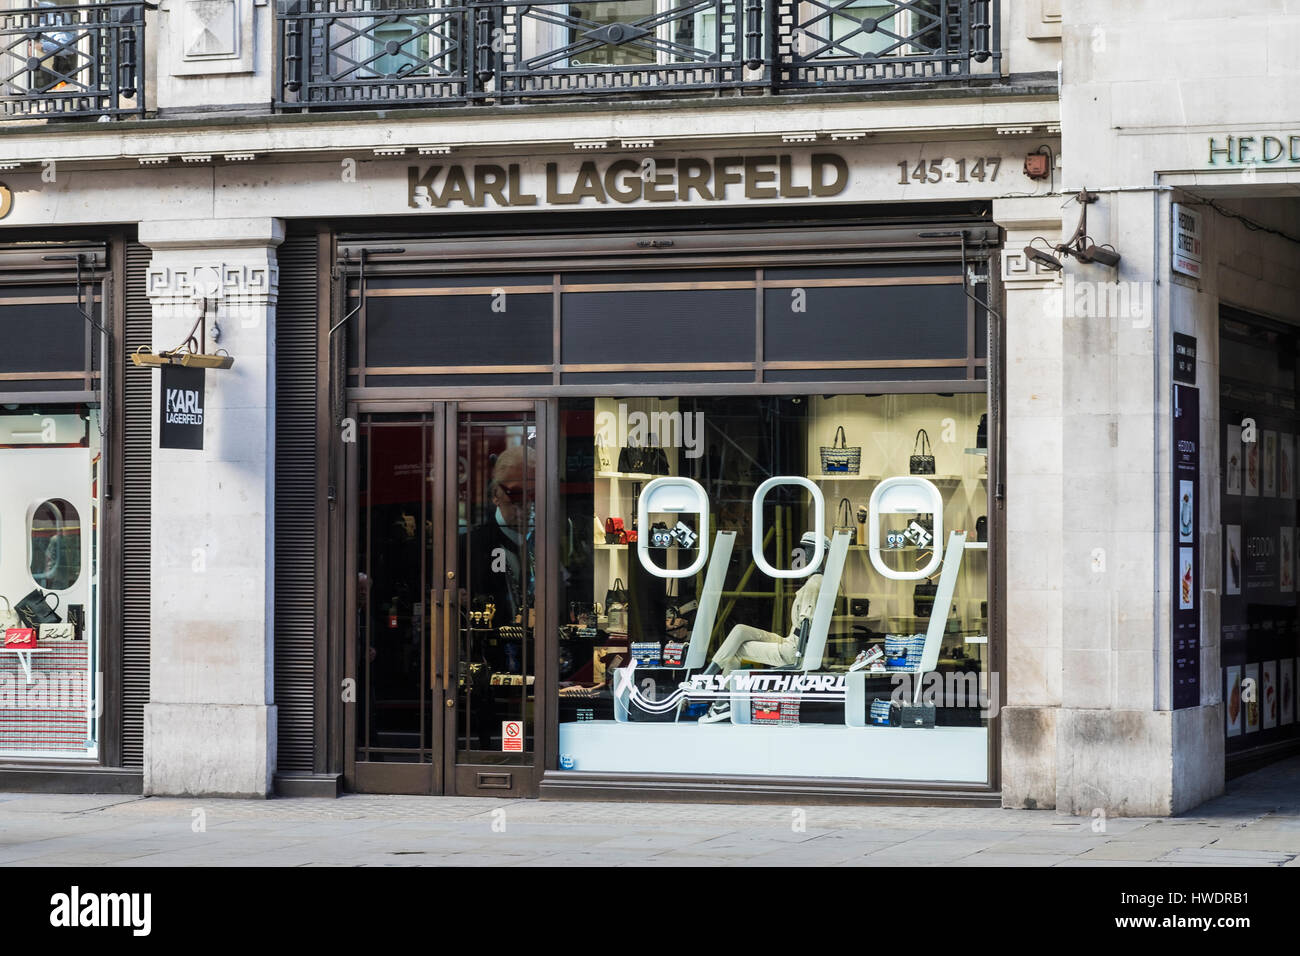 Karl lagerfeld store hi-res stock photography and images - Alamy